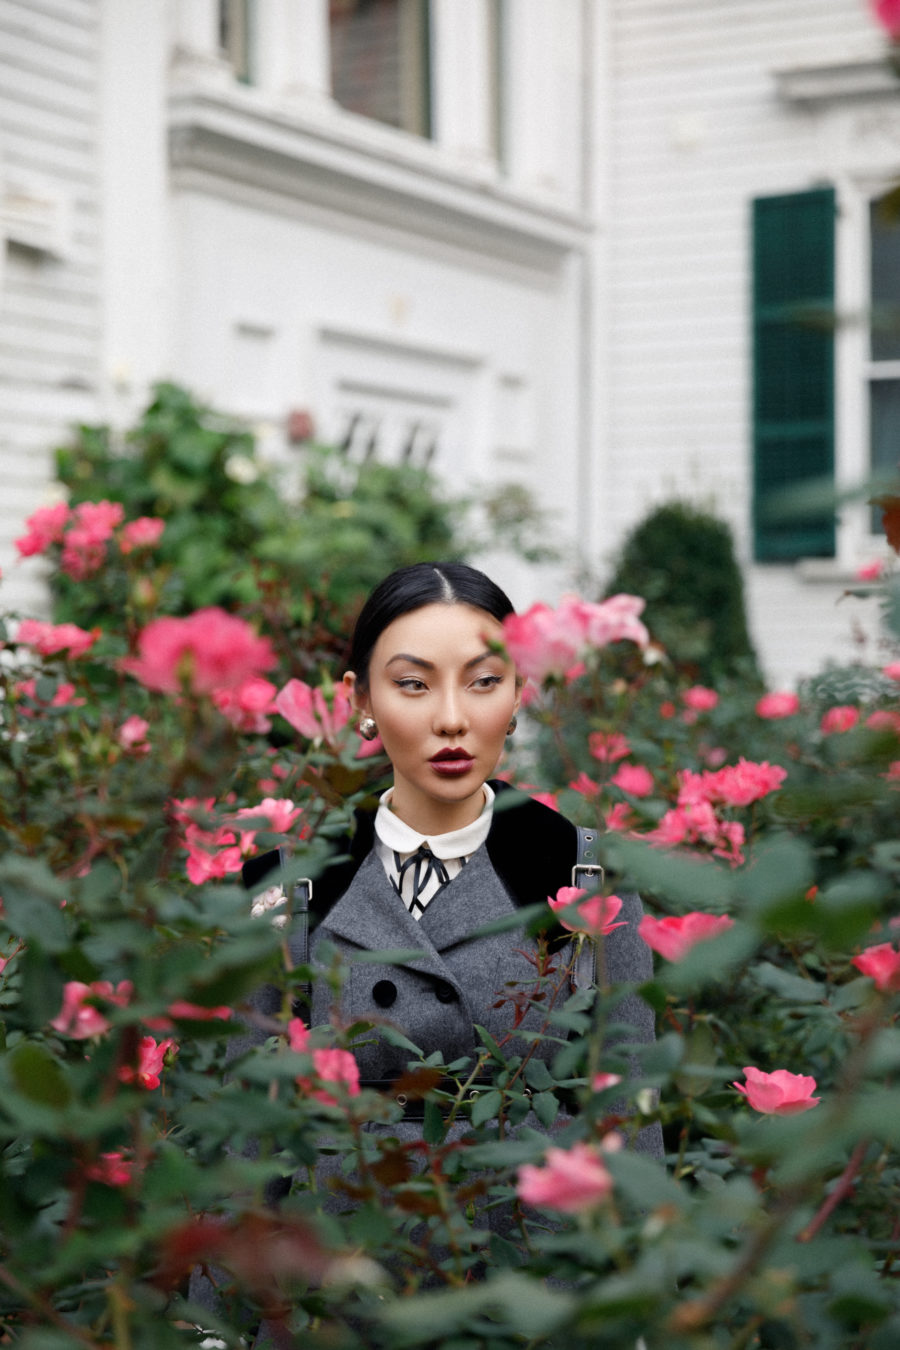 jessica wang wears gray gucci suit in a flower garden and shares how to set goals and achieve them // Jessica Wang - Notjessfashion.com